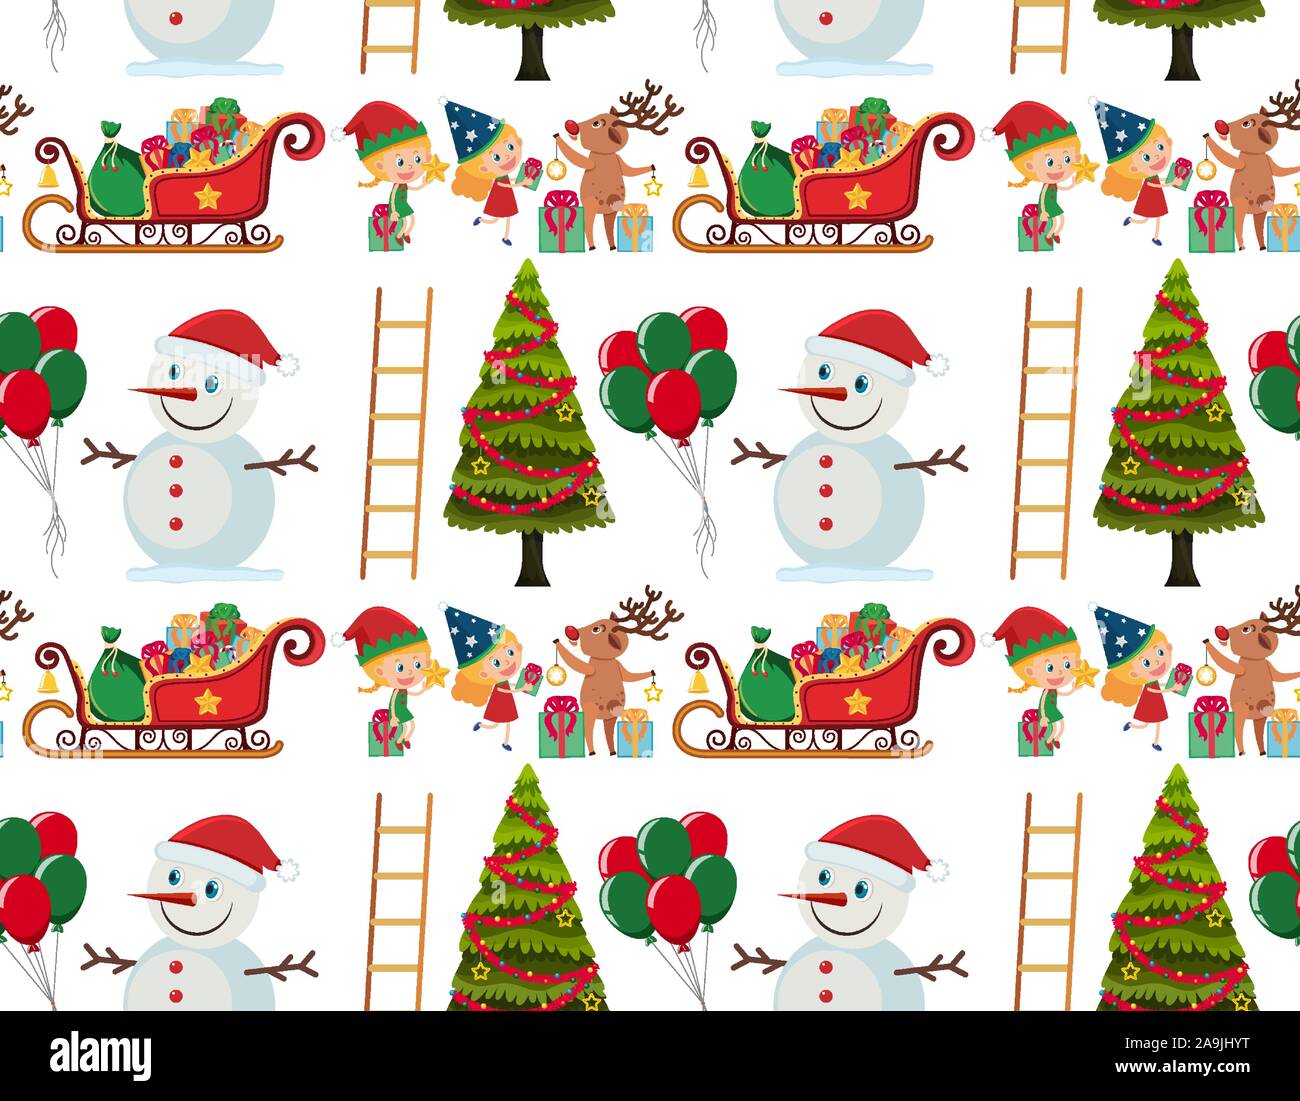 Seamless background design with snowman and tree illustration Stock Vector